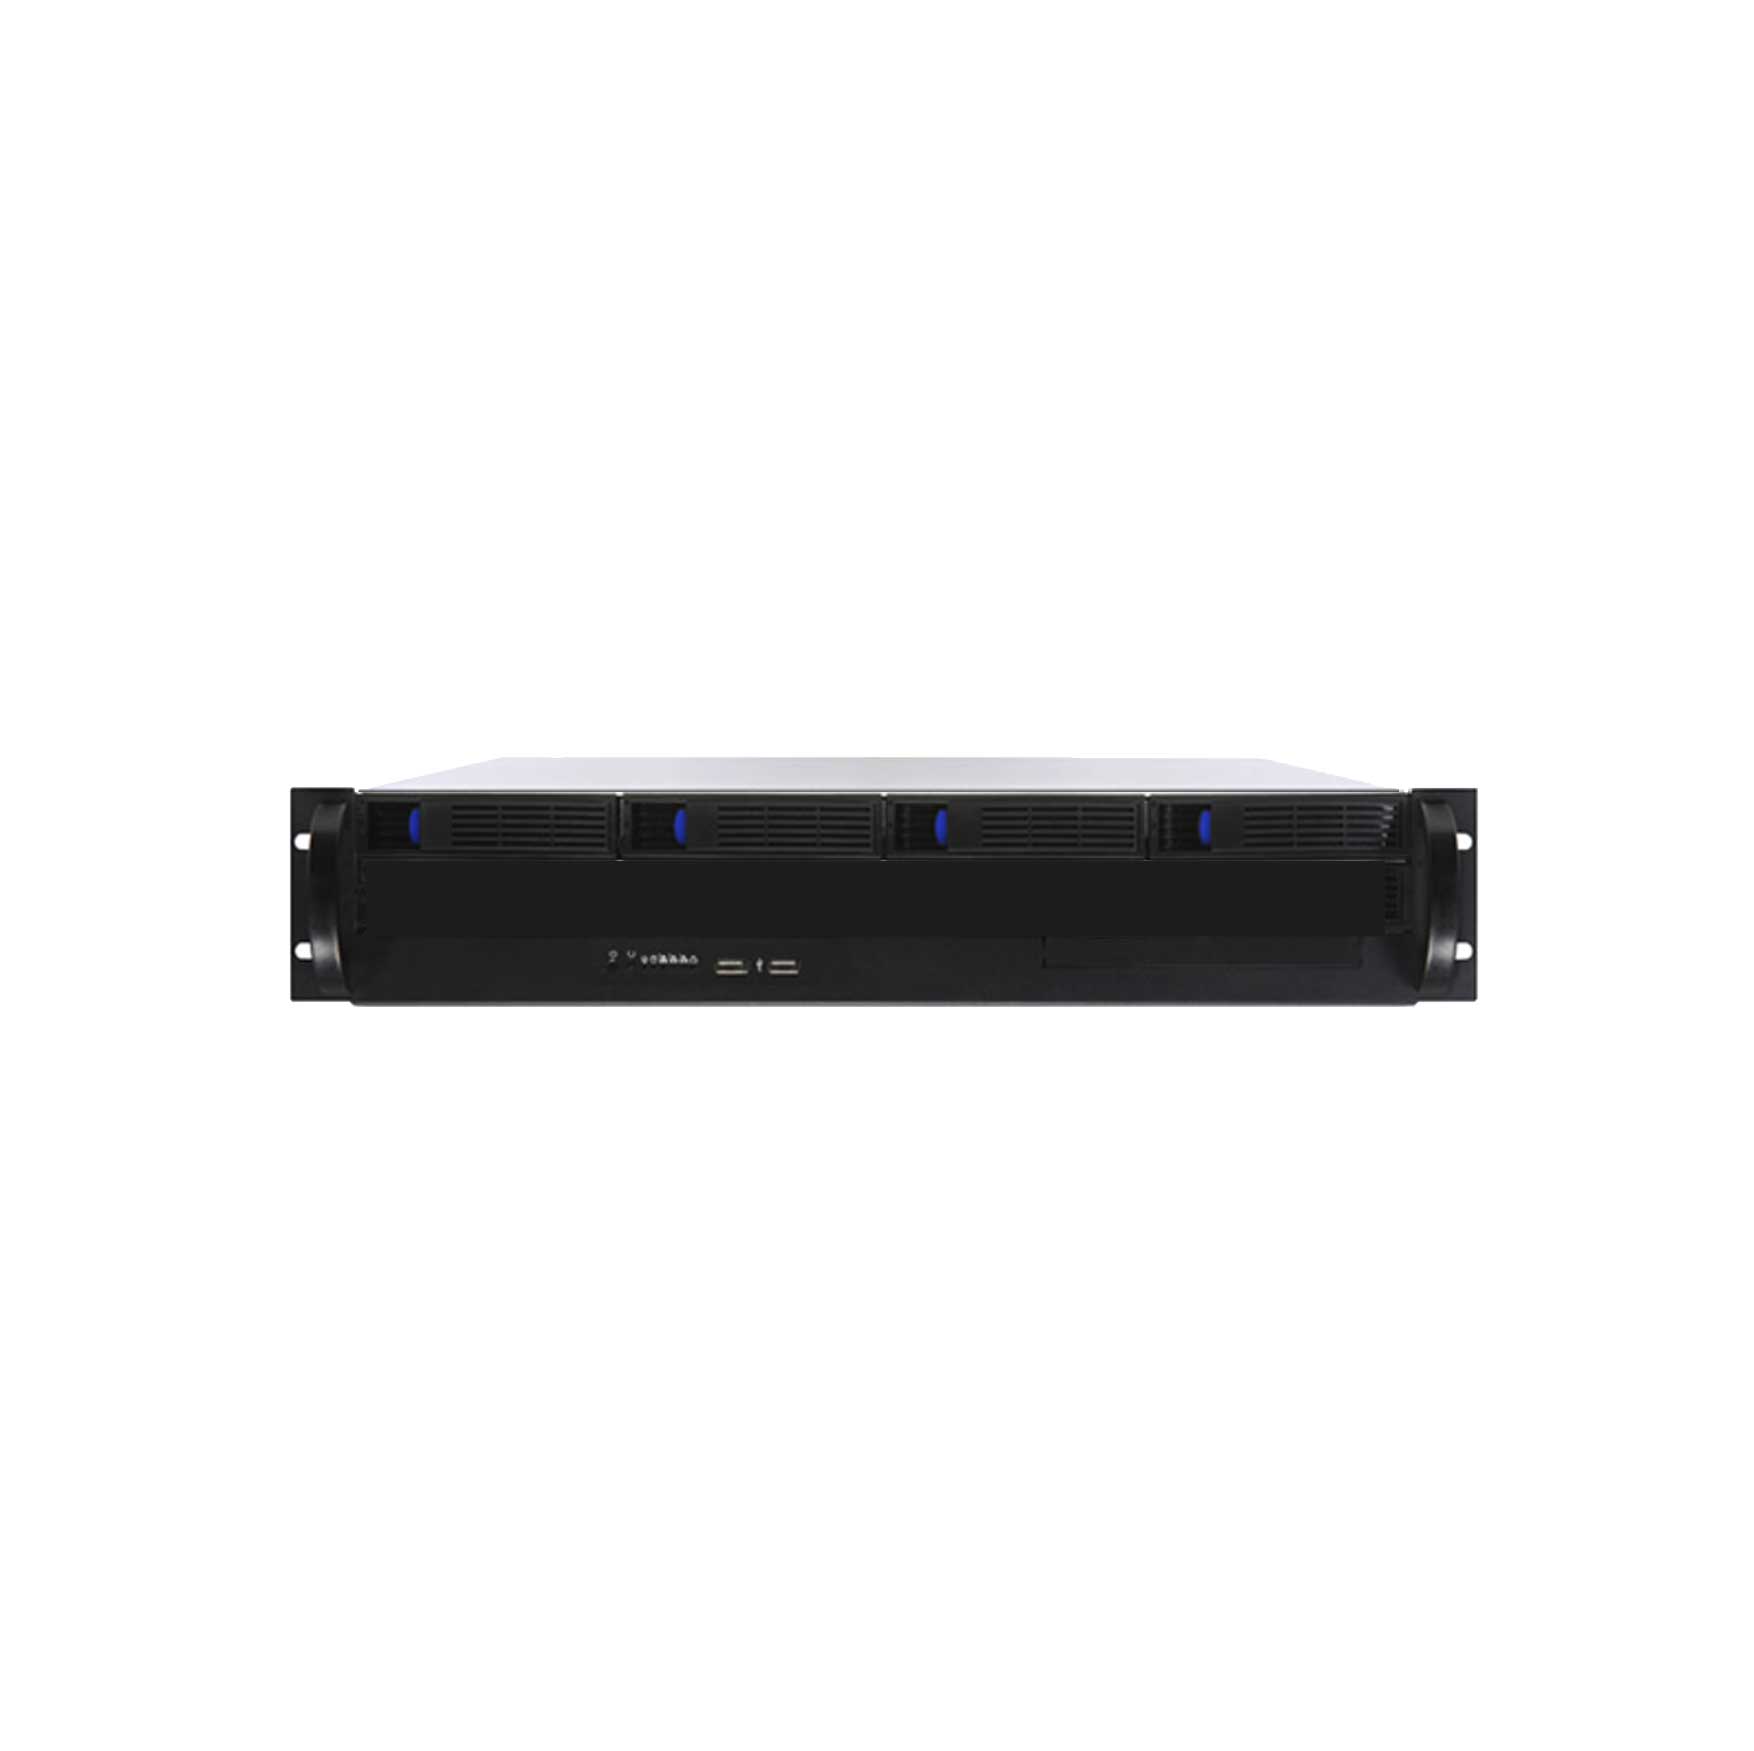 Infinique 36Ch Fortes NVR System Series